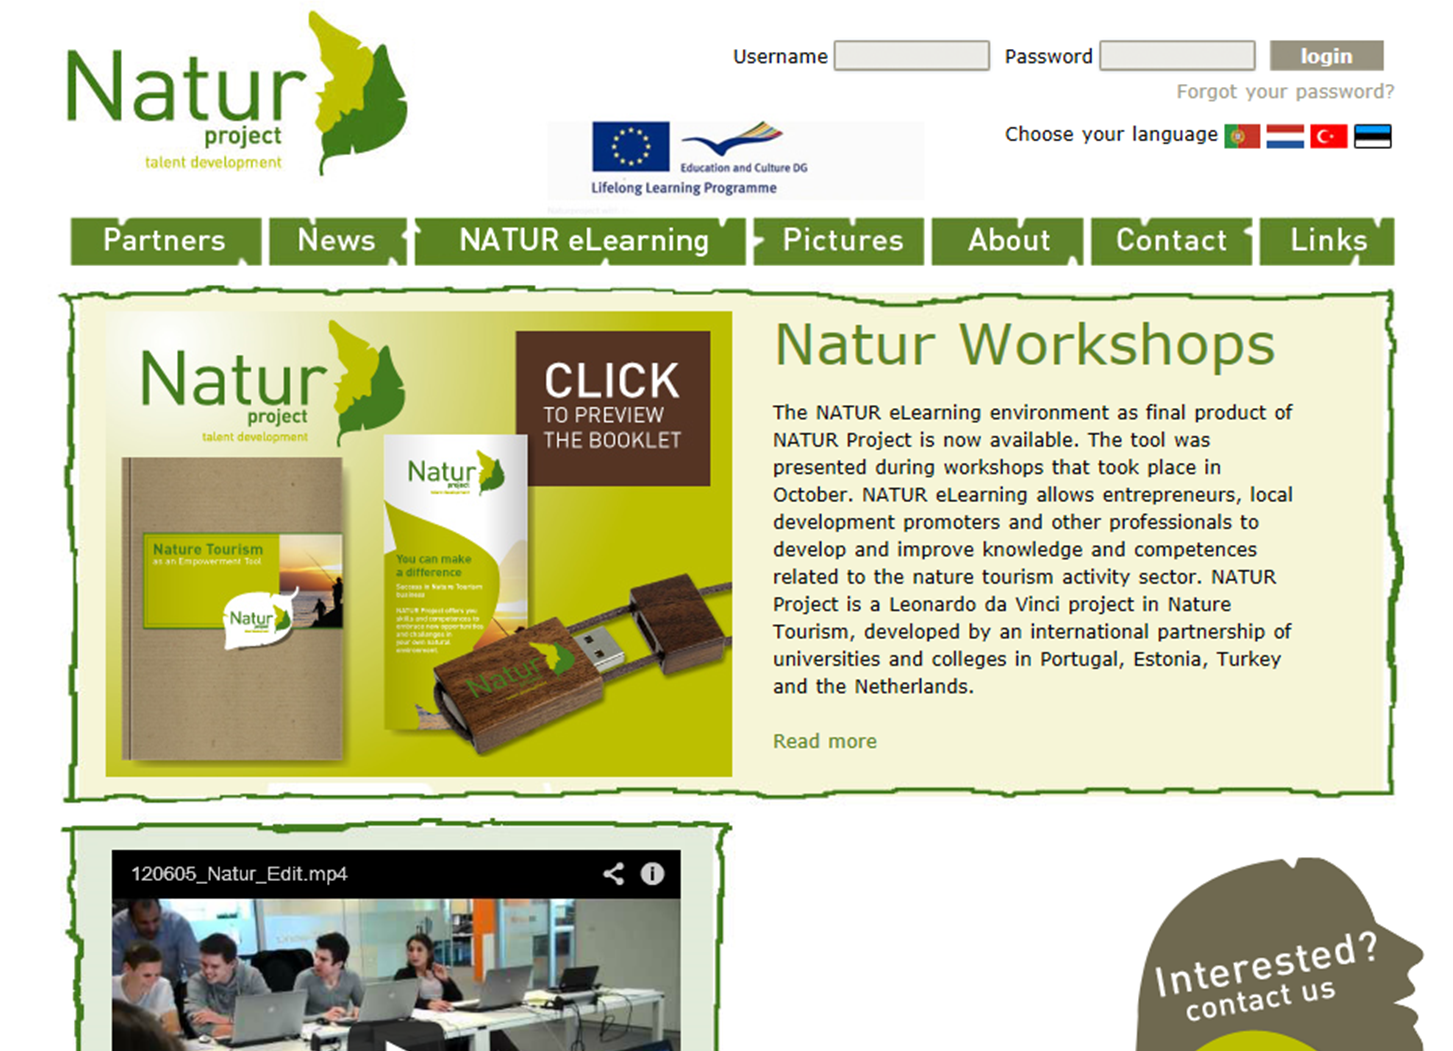 naturproject